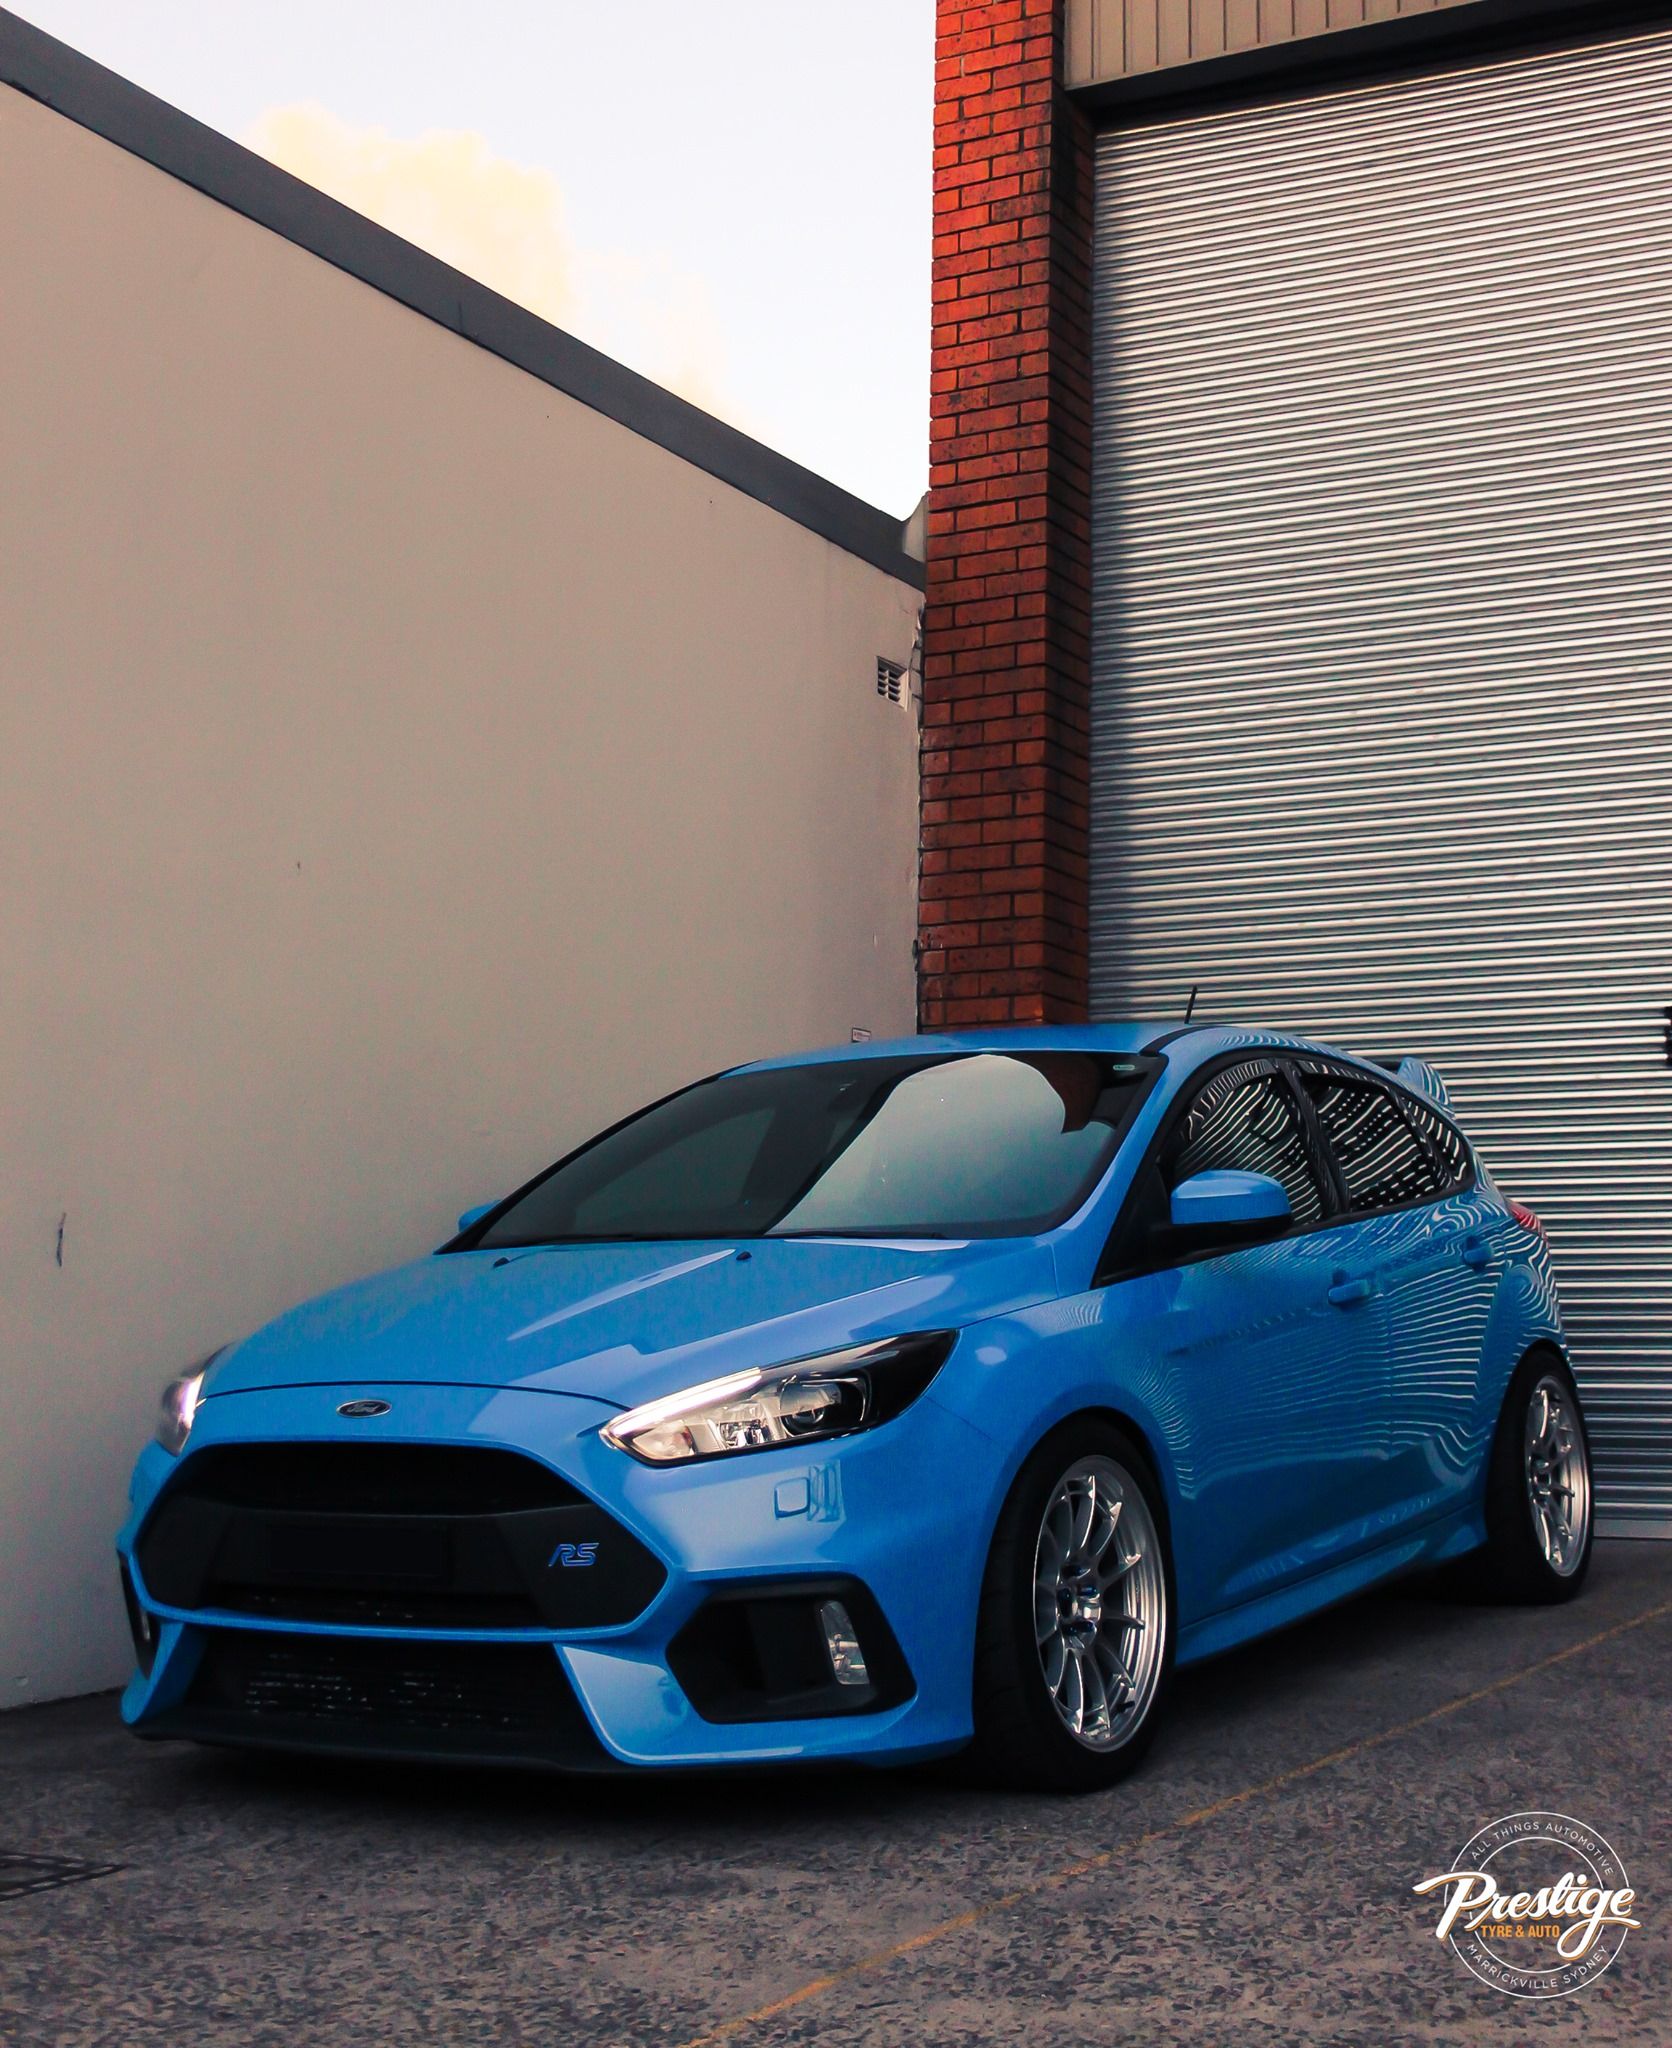 Ford Focus RS Mk3 with 18×9.5-inch Enkei NT03+M